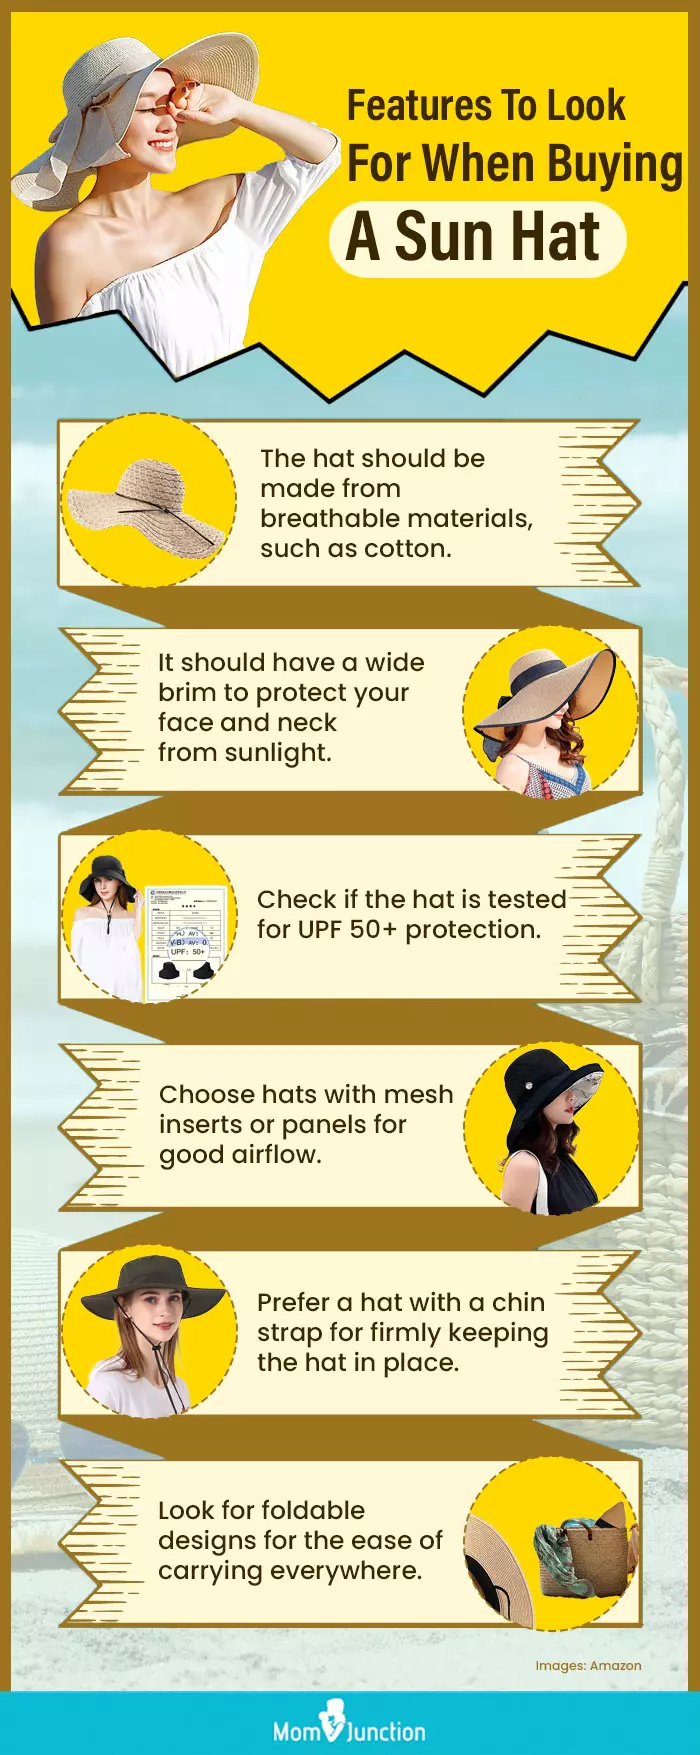 Features To Look For When Buying A Sun Hat (infographic)